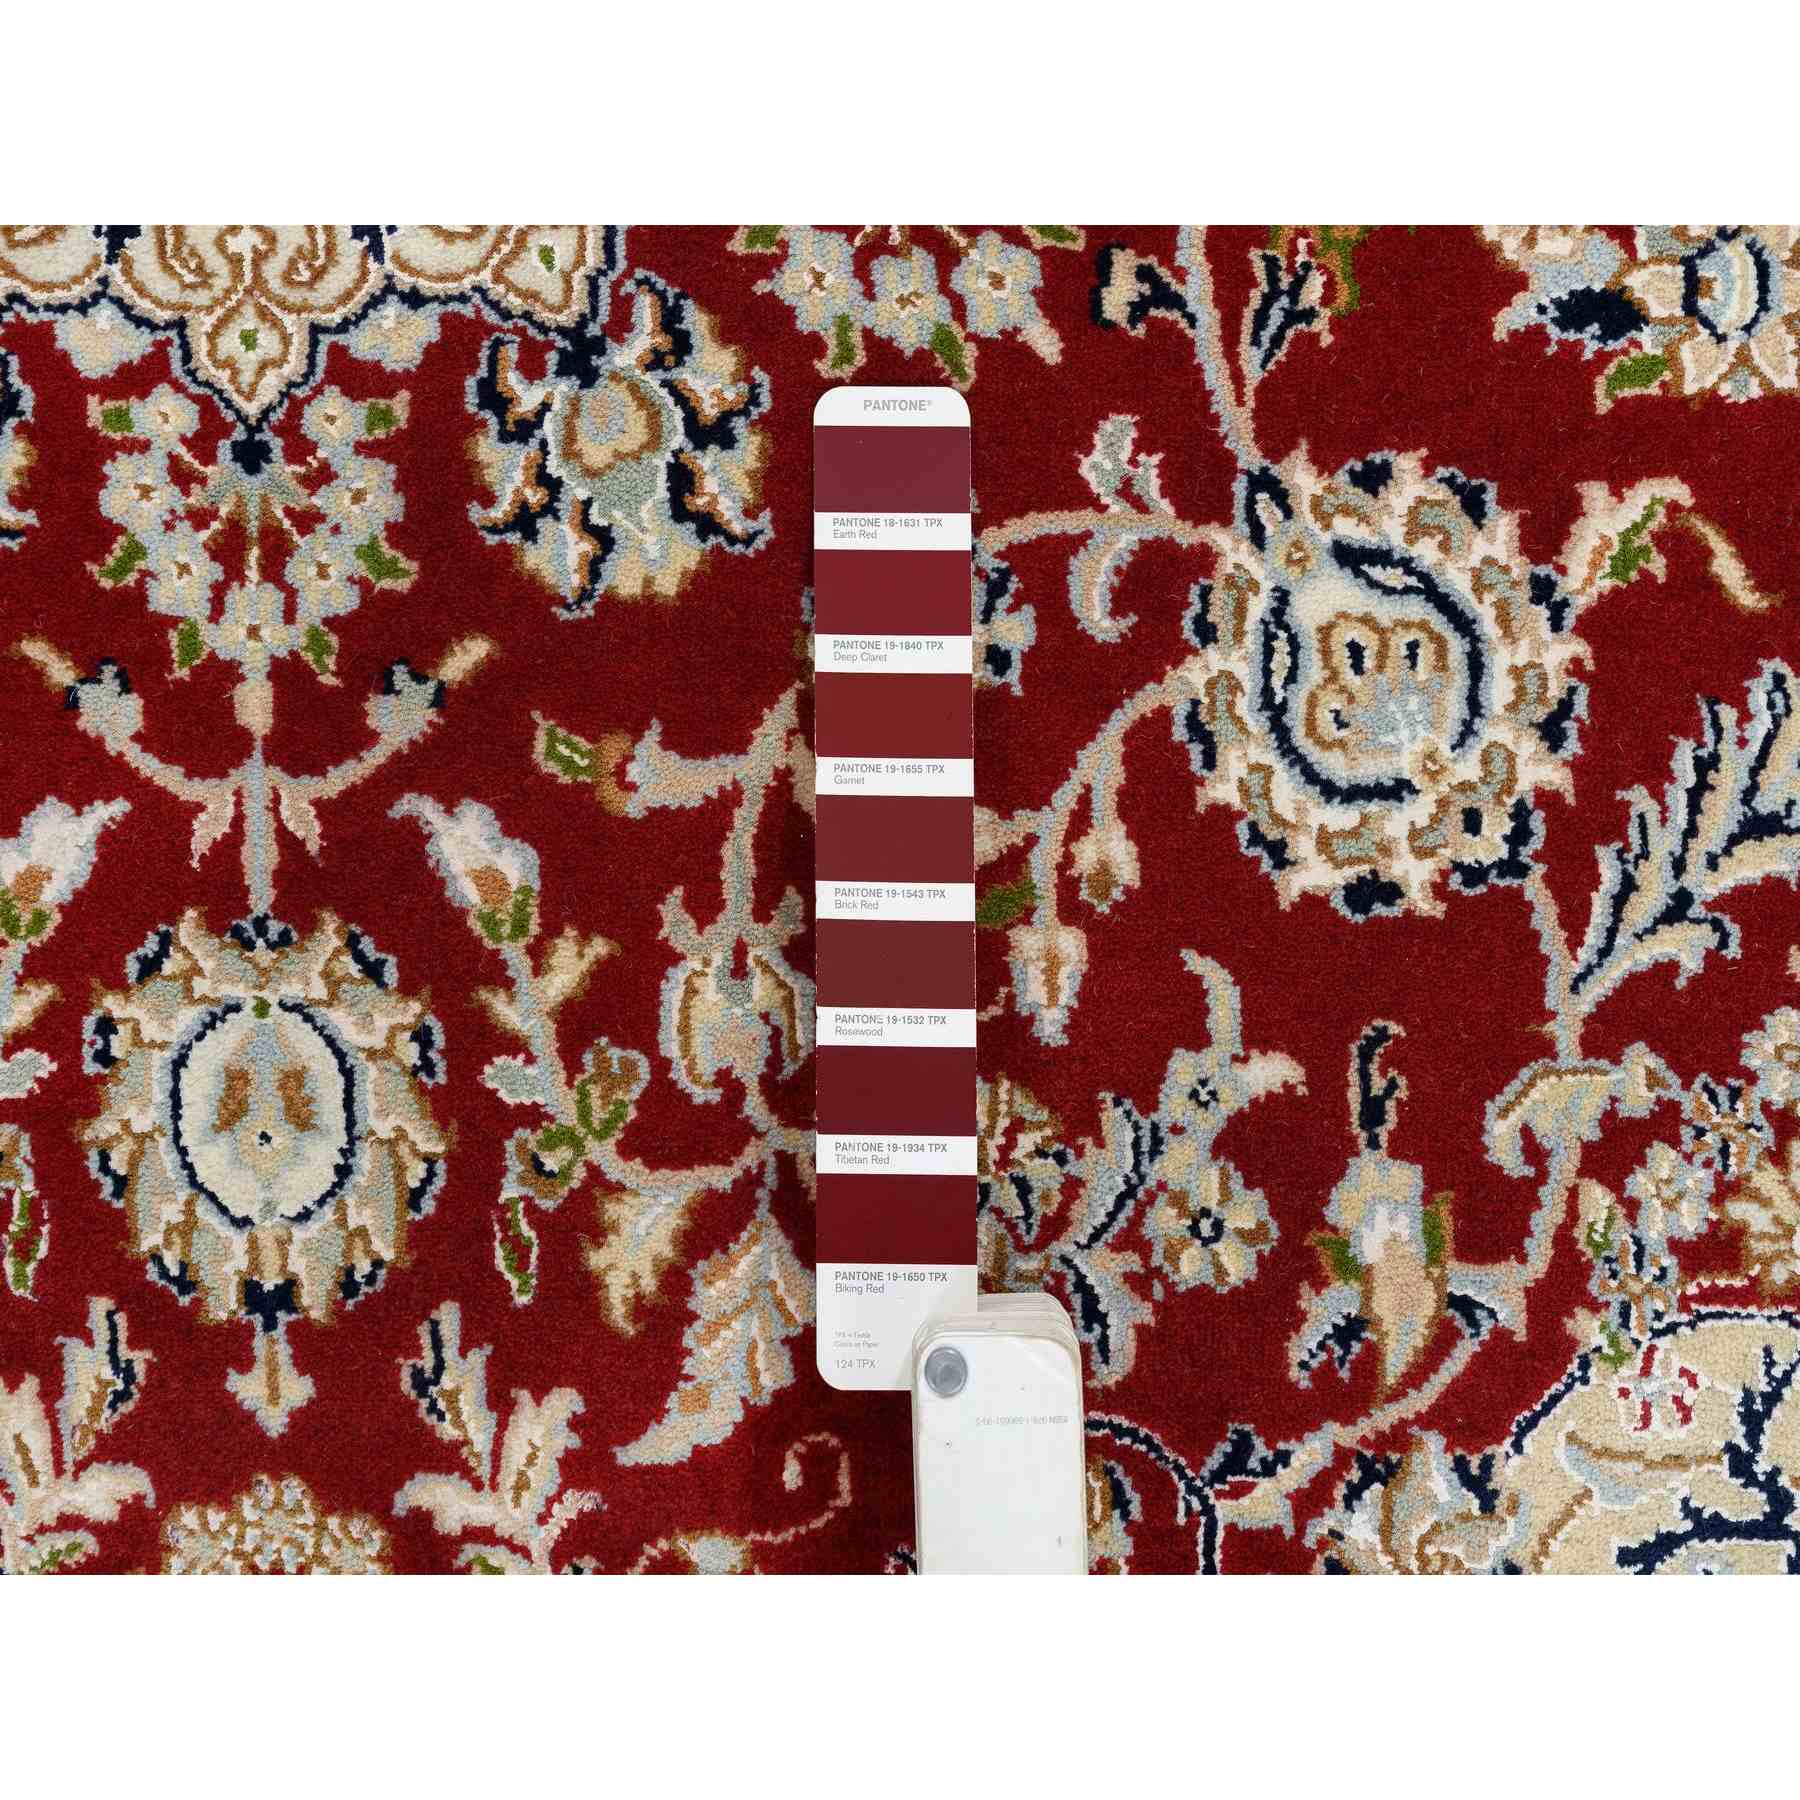 Fine-Oriental-Hand-Knotted-Rug-323620